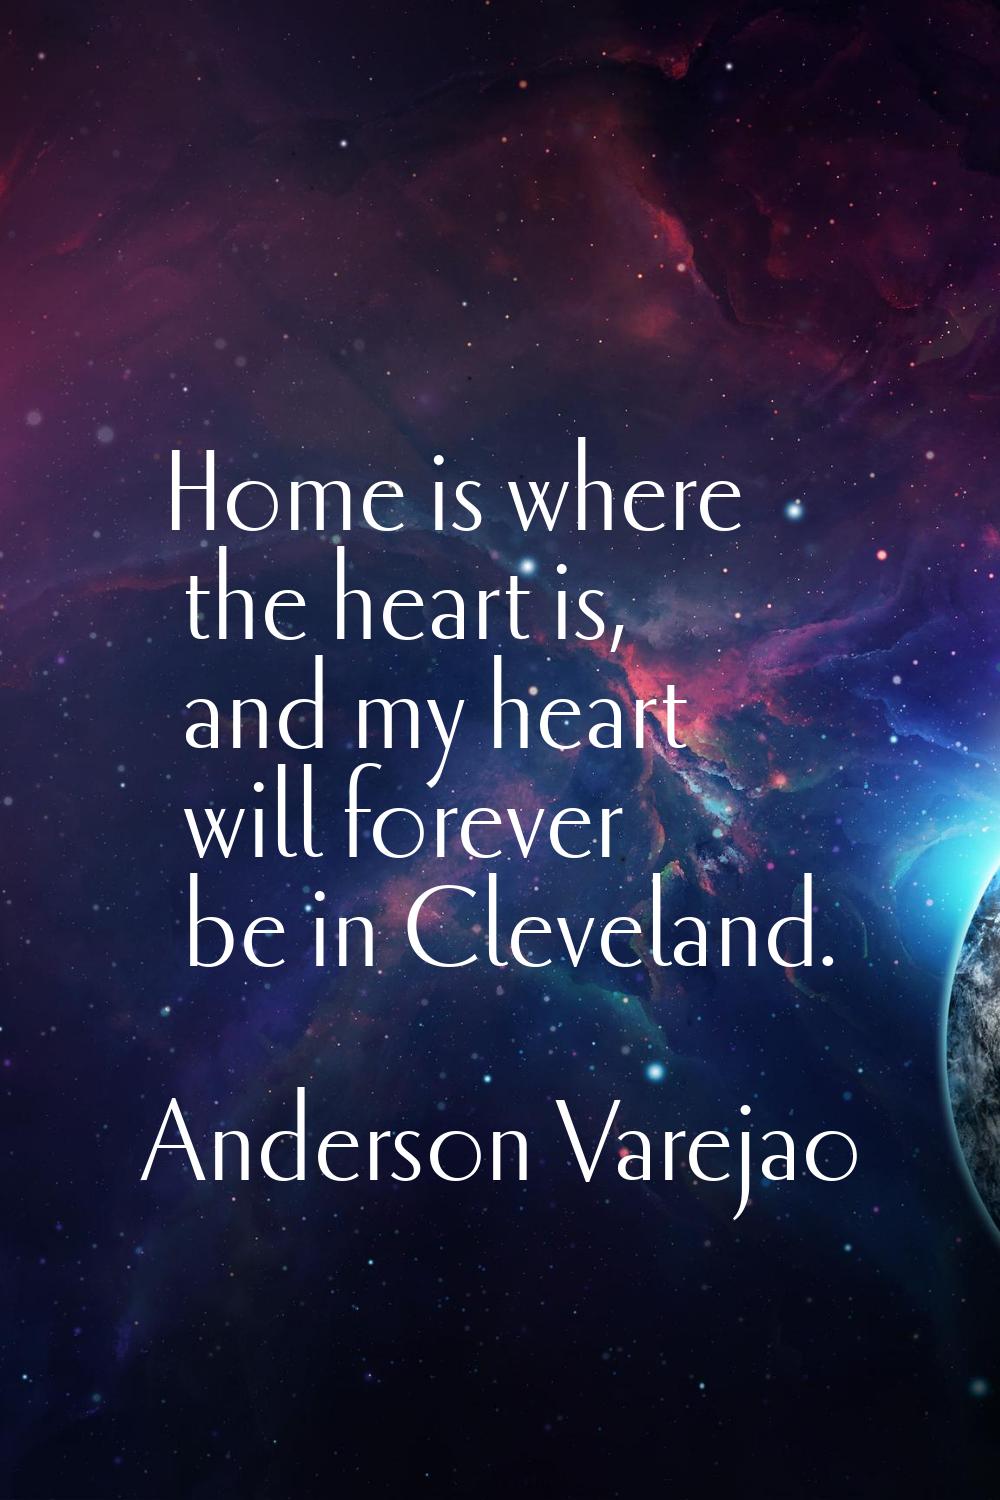 Home is where the heart is, and my heart will forever be in Cleveland.